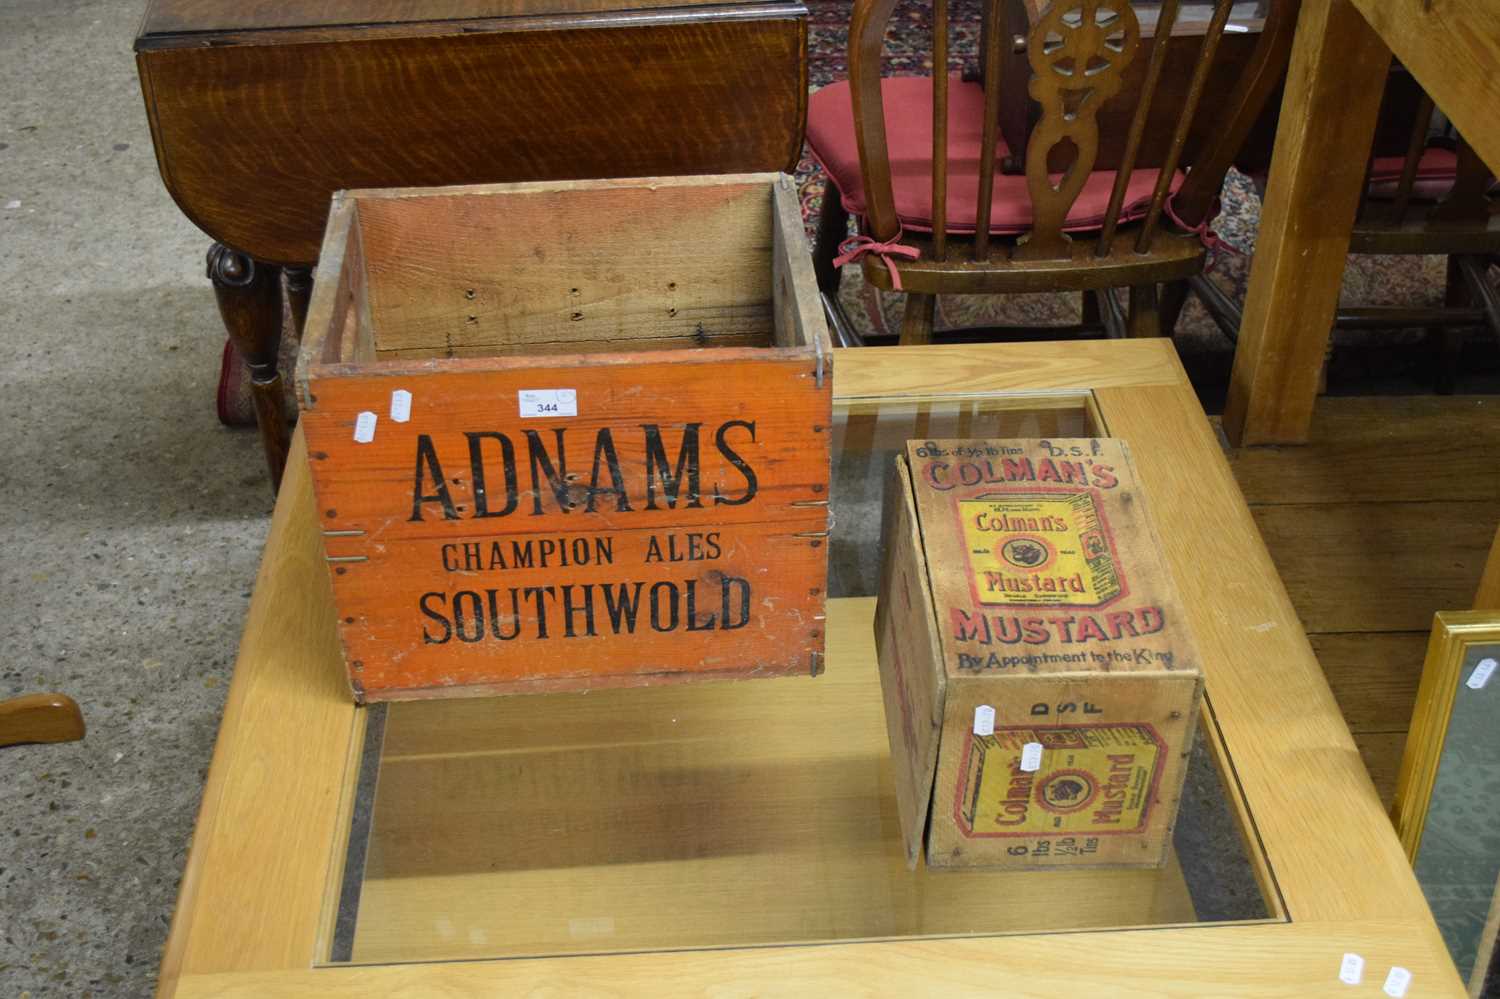 VINTAGE BOTTLE CRATE MARKED 'ADNAMS SOUTHWOLD', TOGETHER WITH A FURTHER CRATE MARKED 'COLMAN'S